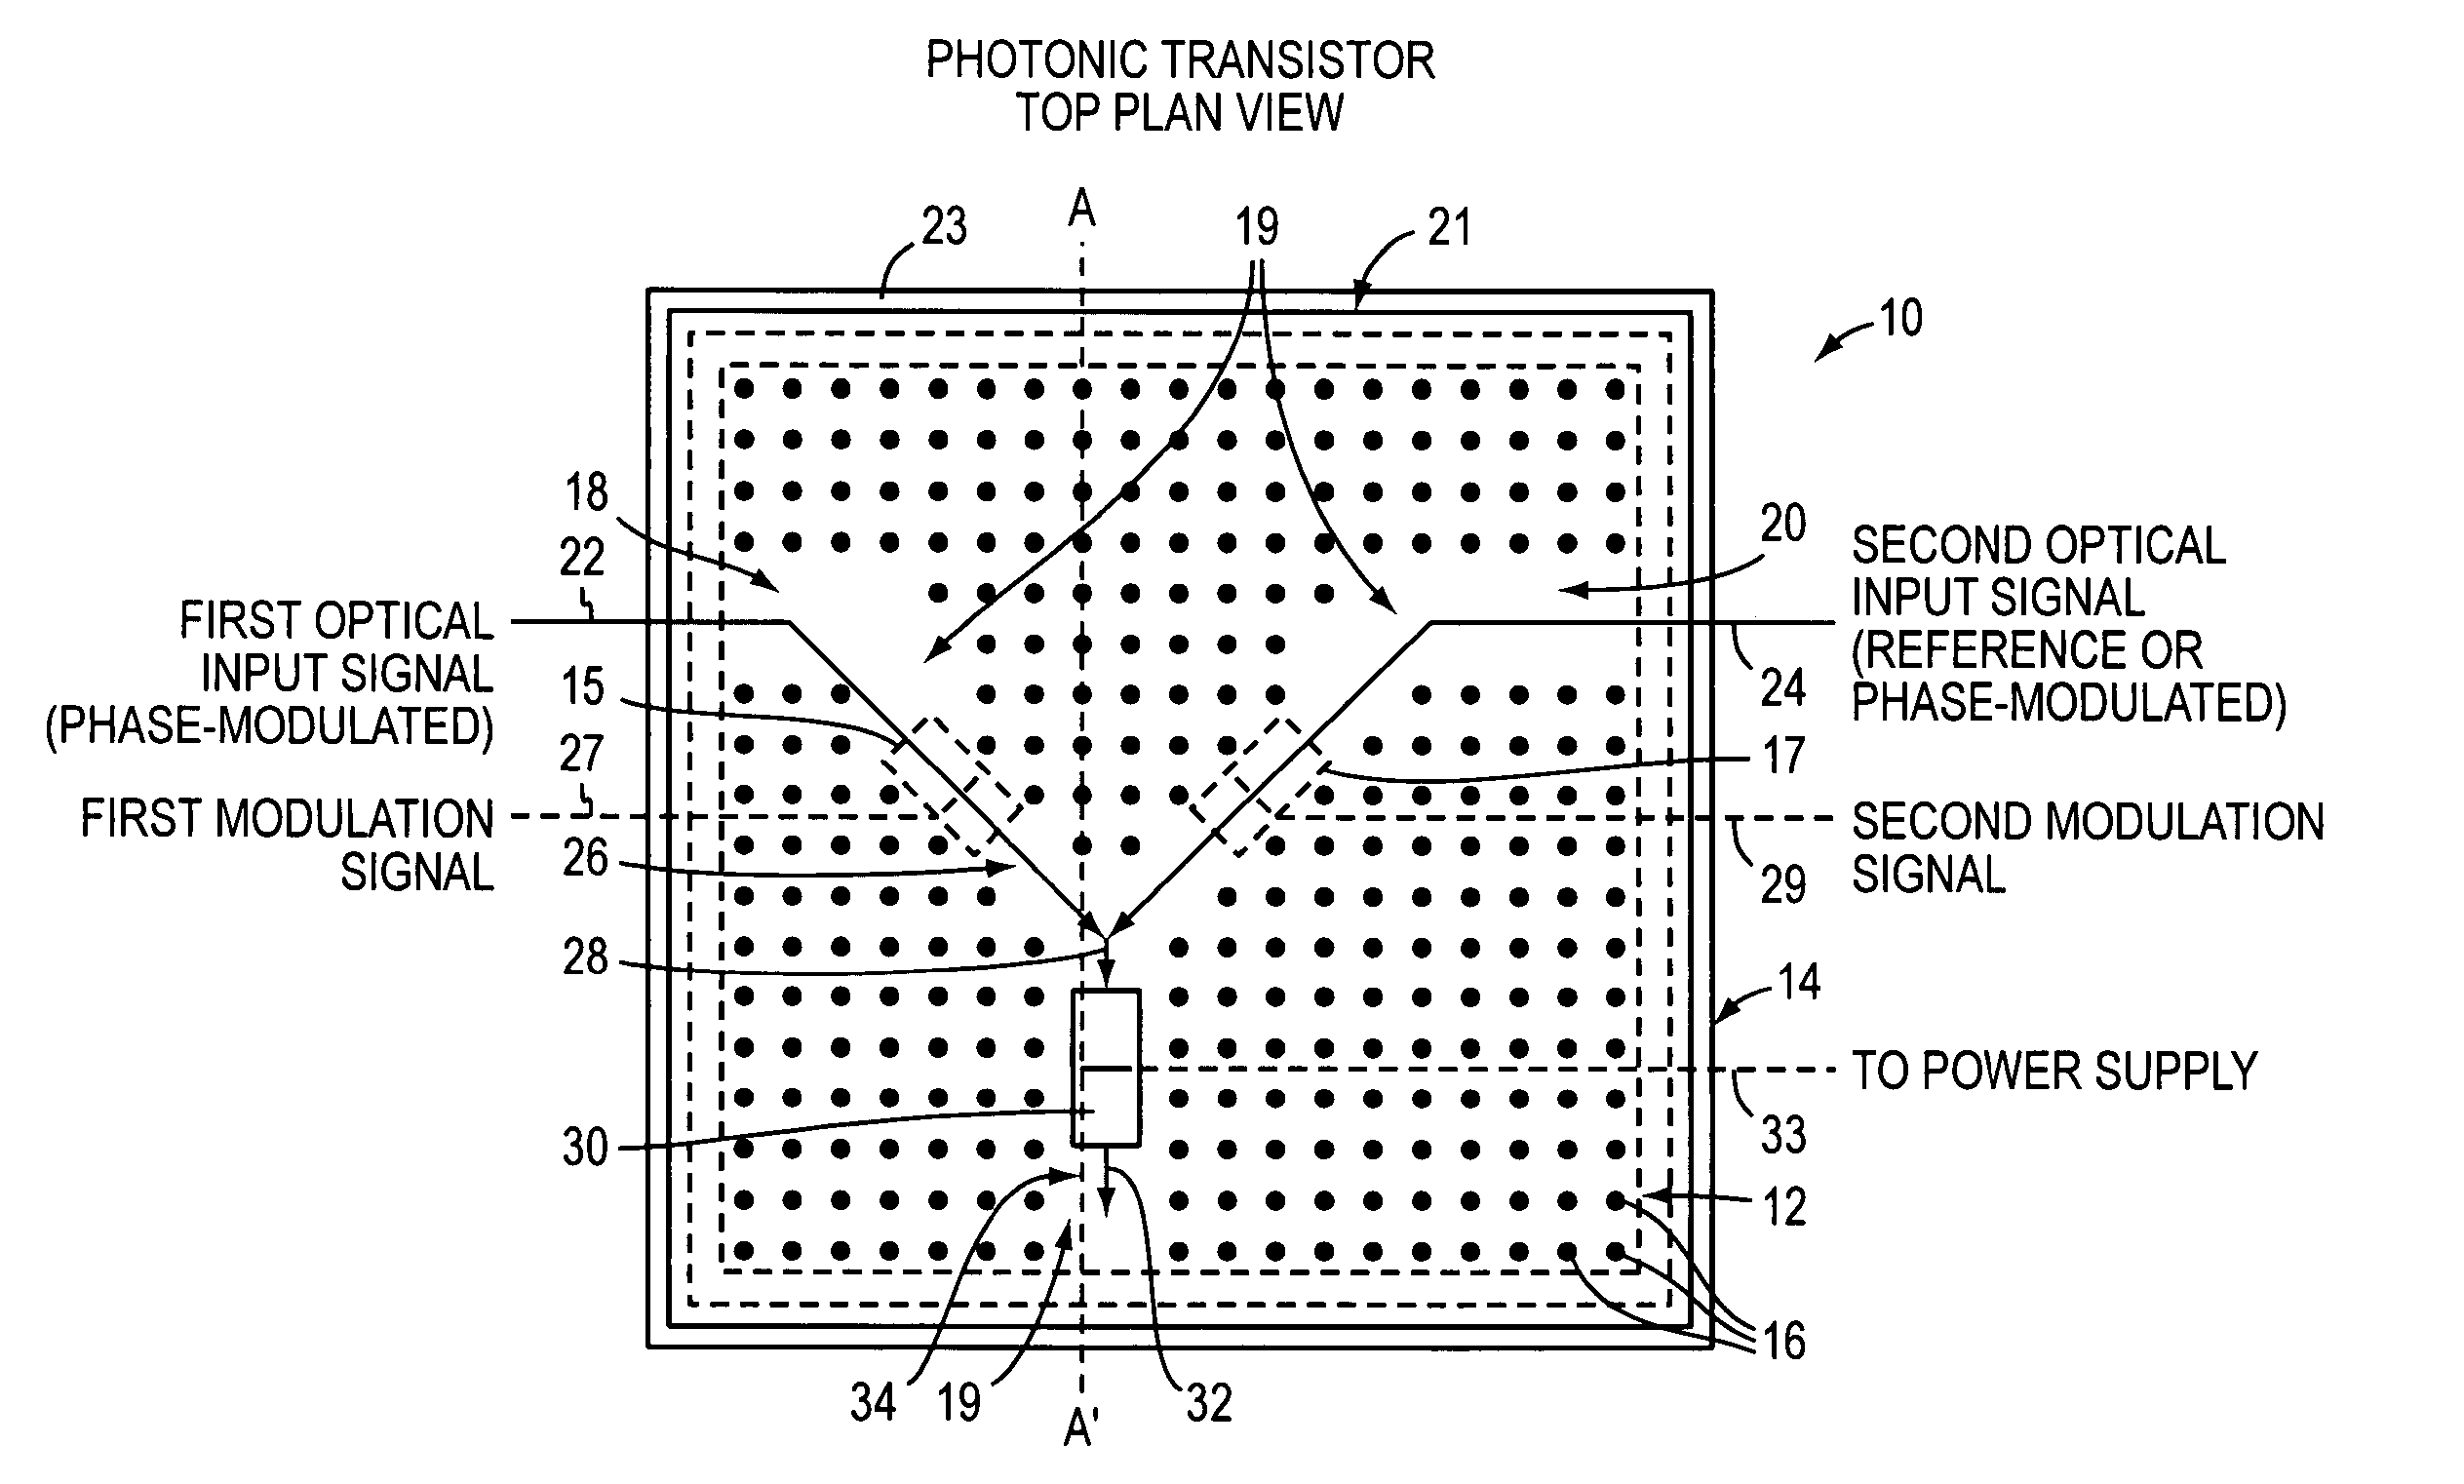 Optical device and circuit using phase modulation and related methods